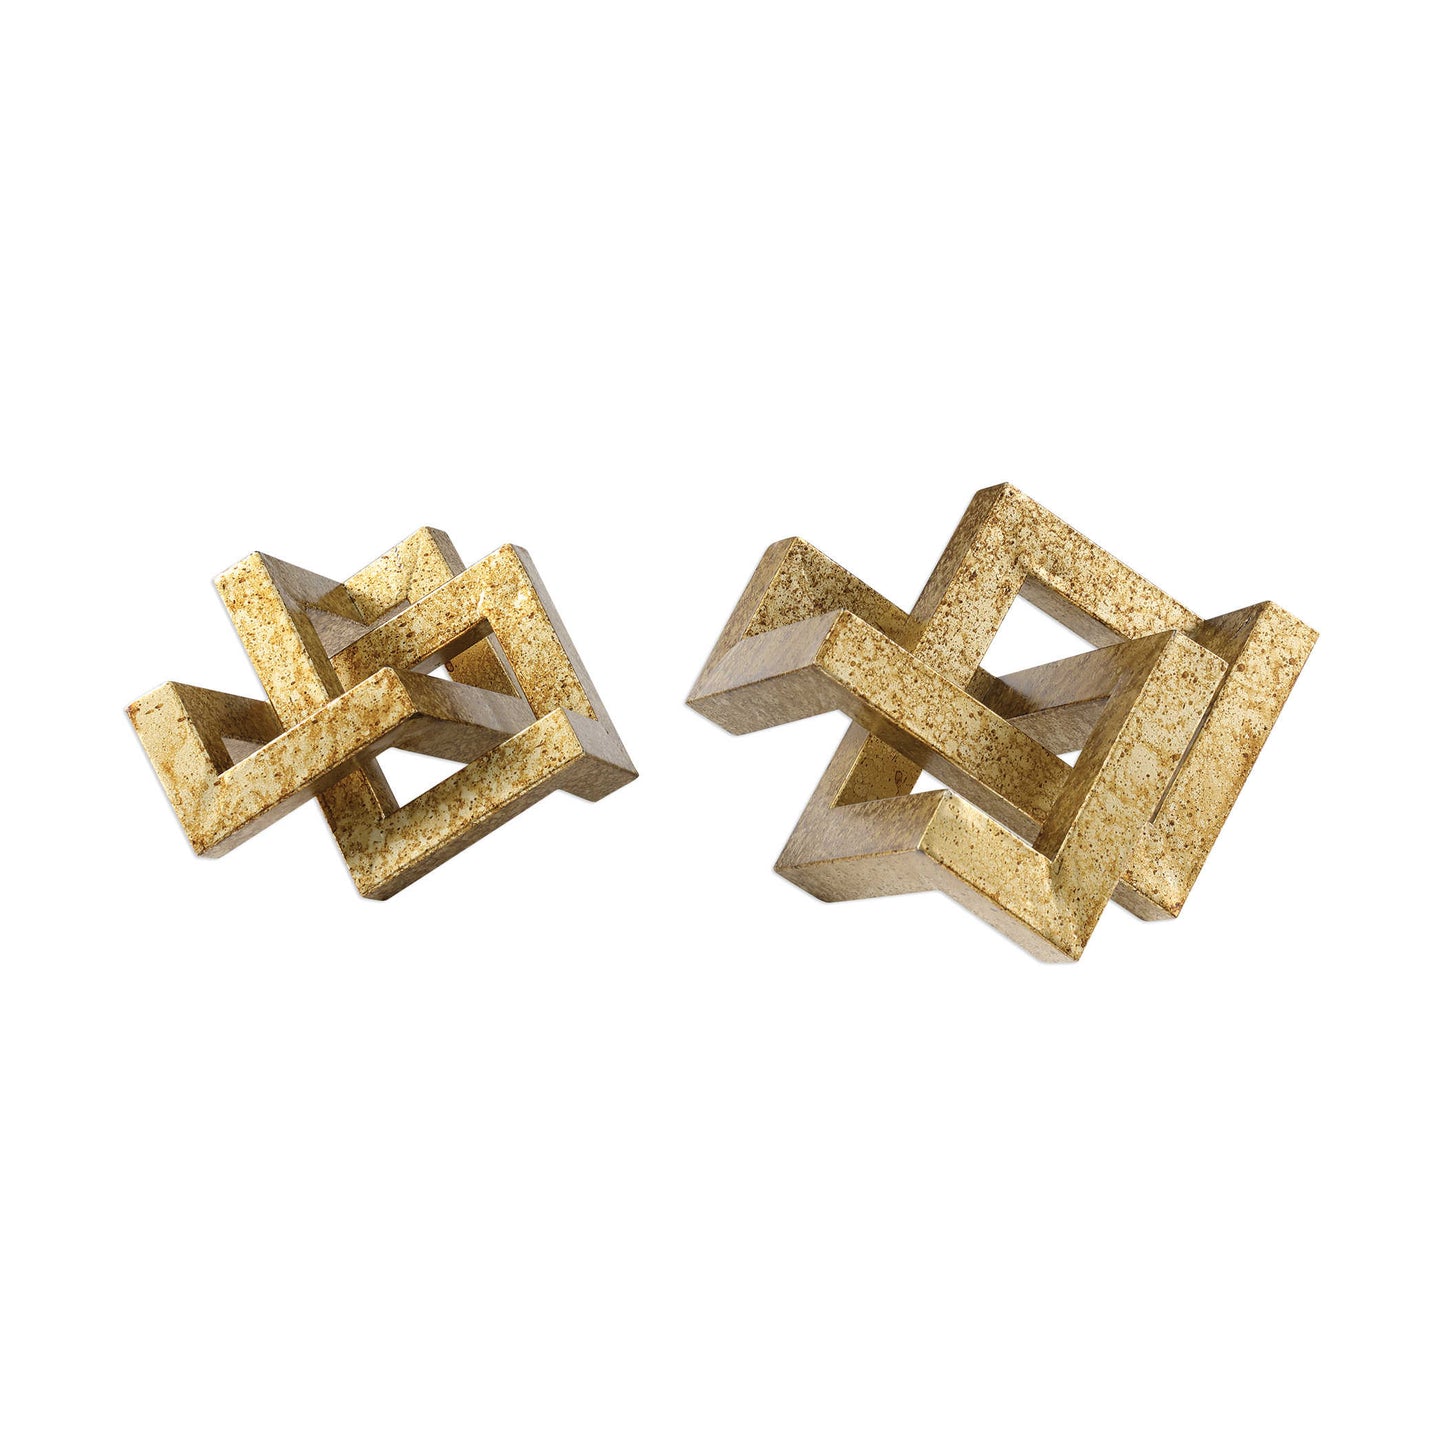 Ayan Gold Decorative Accents, Set of 2 18927